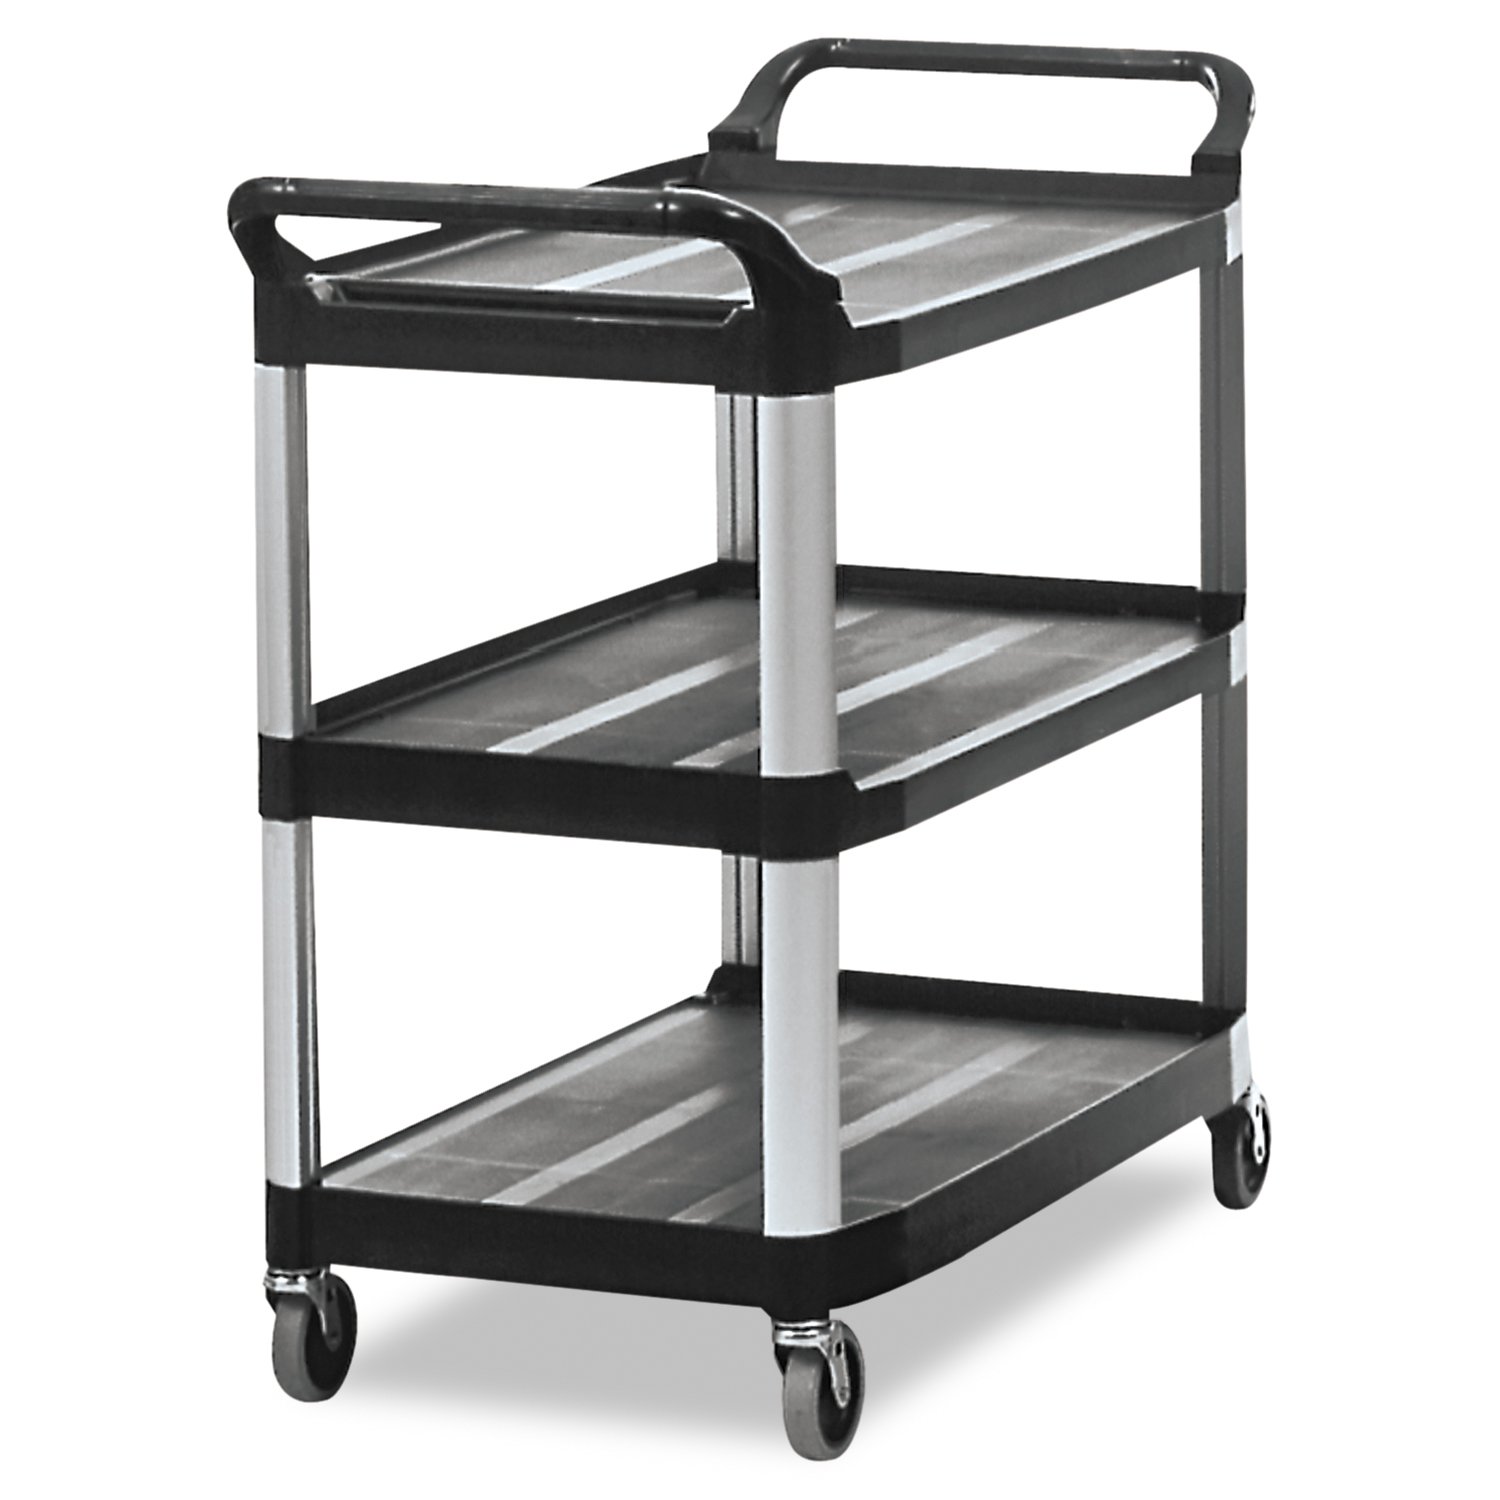 Rubbermaid Commercial Products Heavy Duty 3-Shelf Rolling Service/Utility/Push Cart